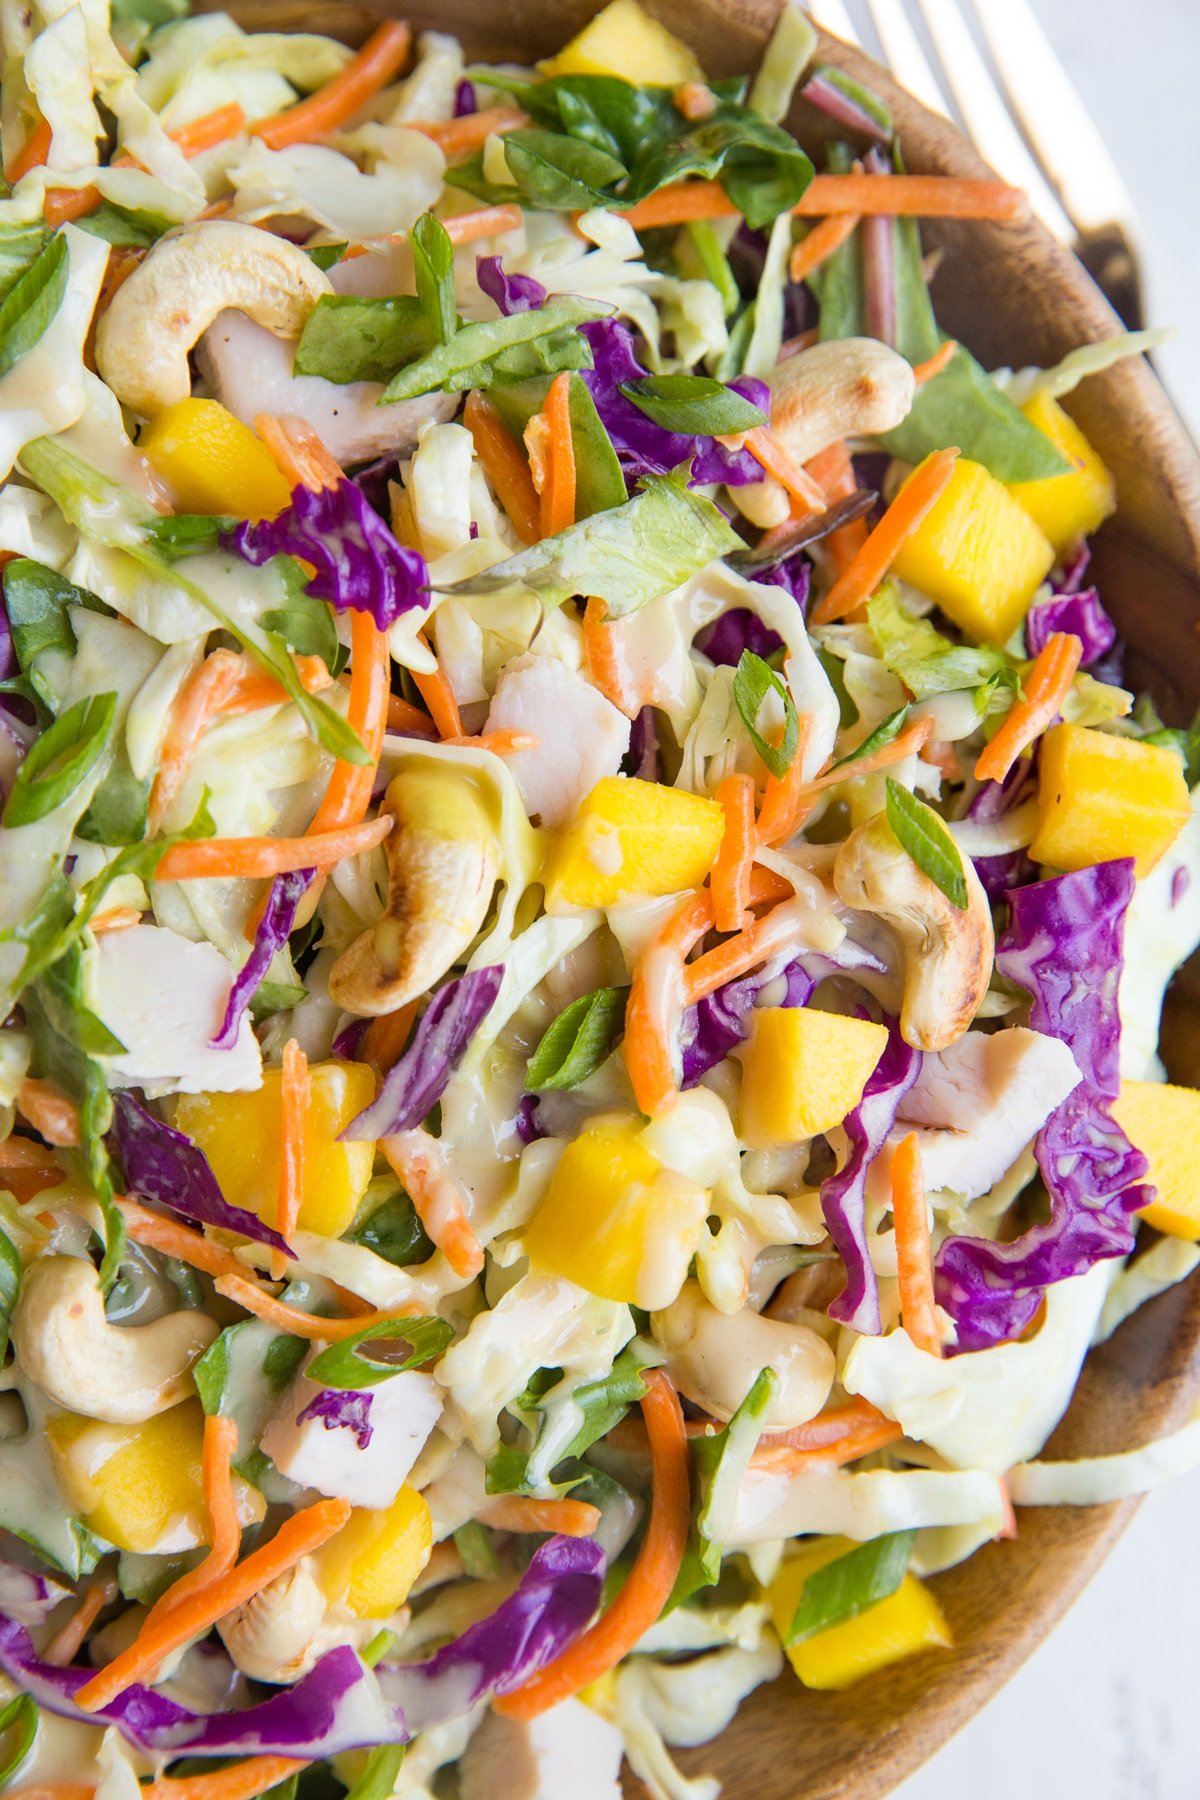 Thai Chicken Chopped Salad with cabbage, mango, and peanut dressing in a wooden bowl, ready to serve.